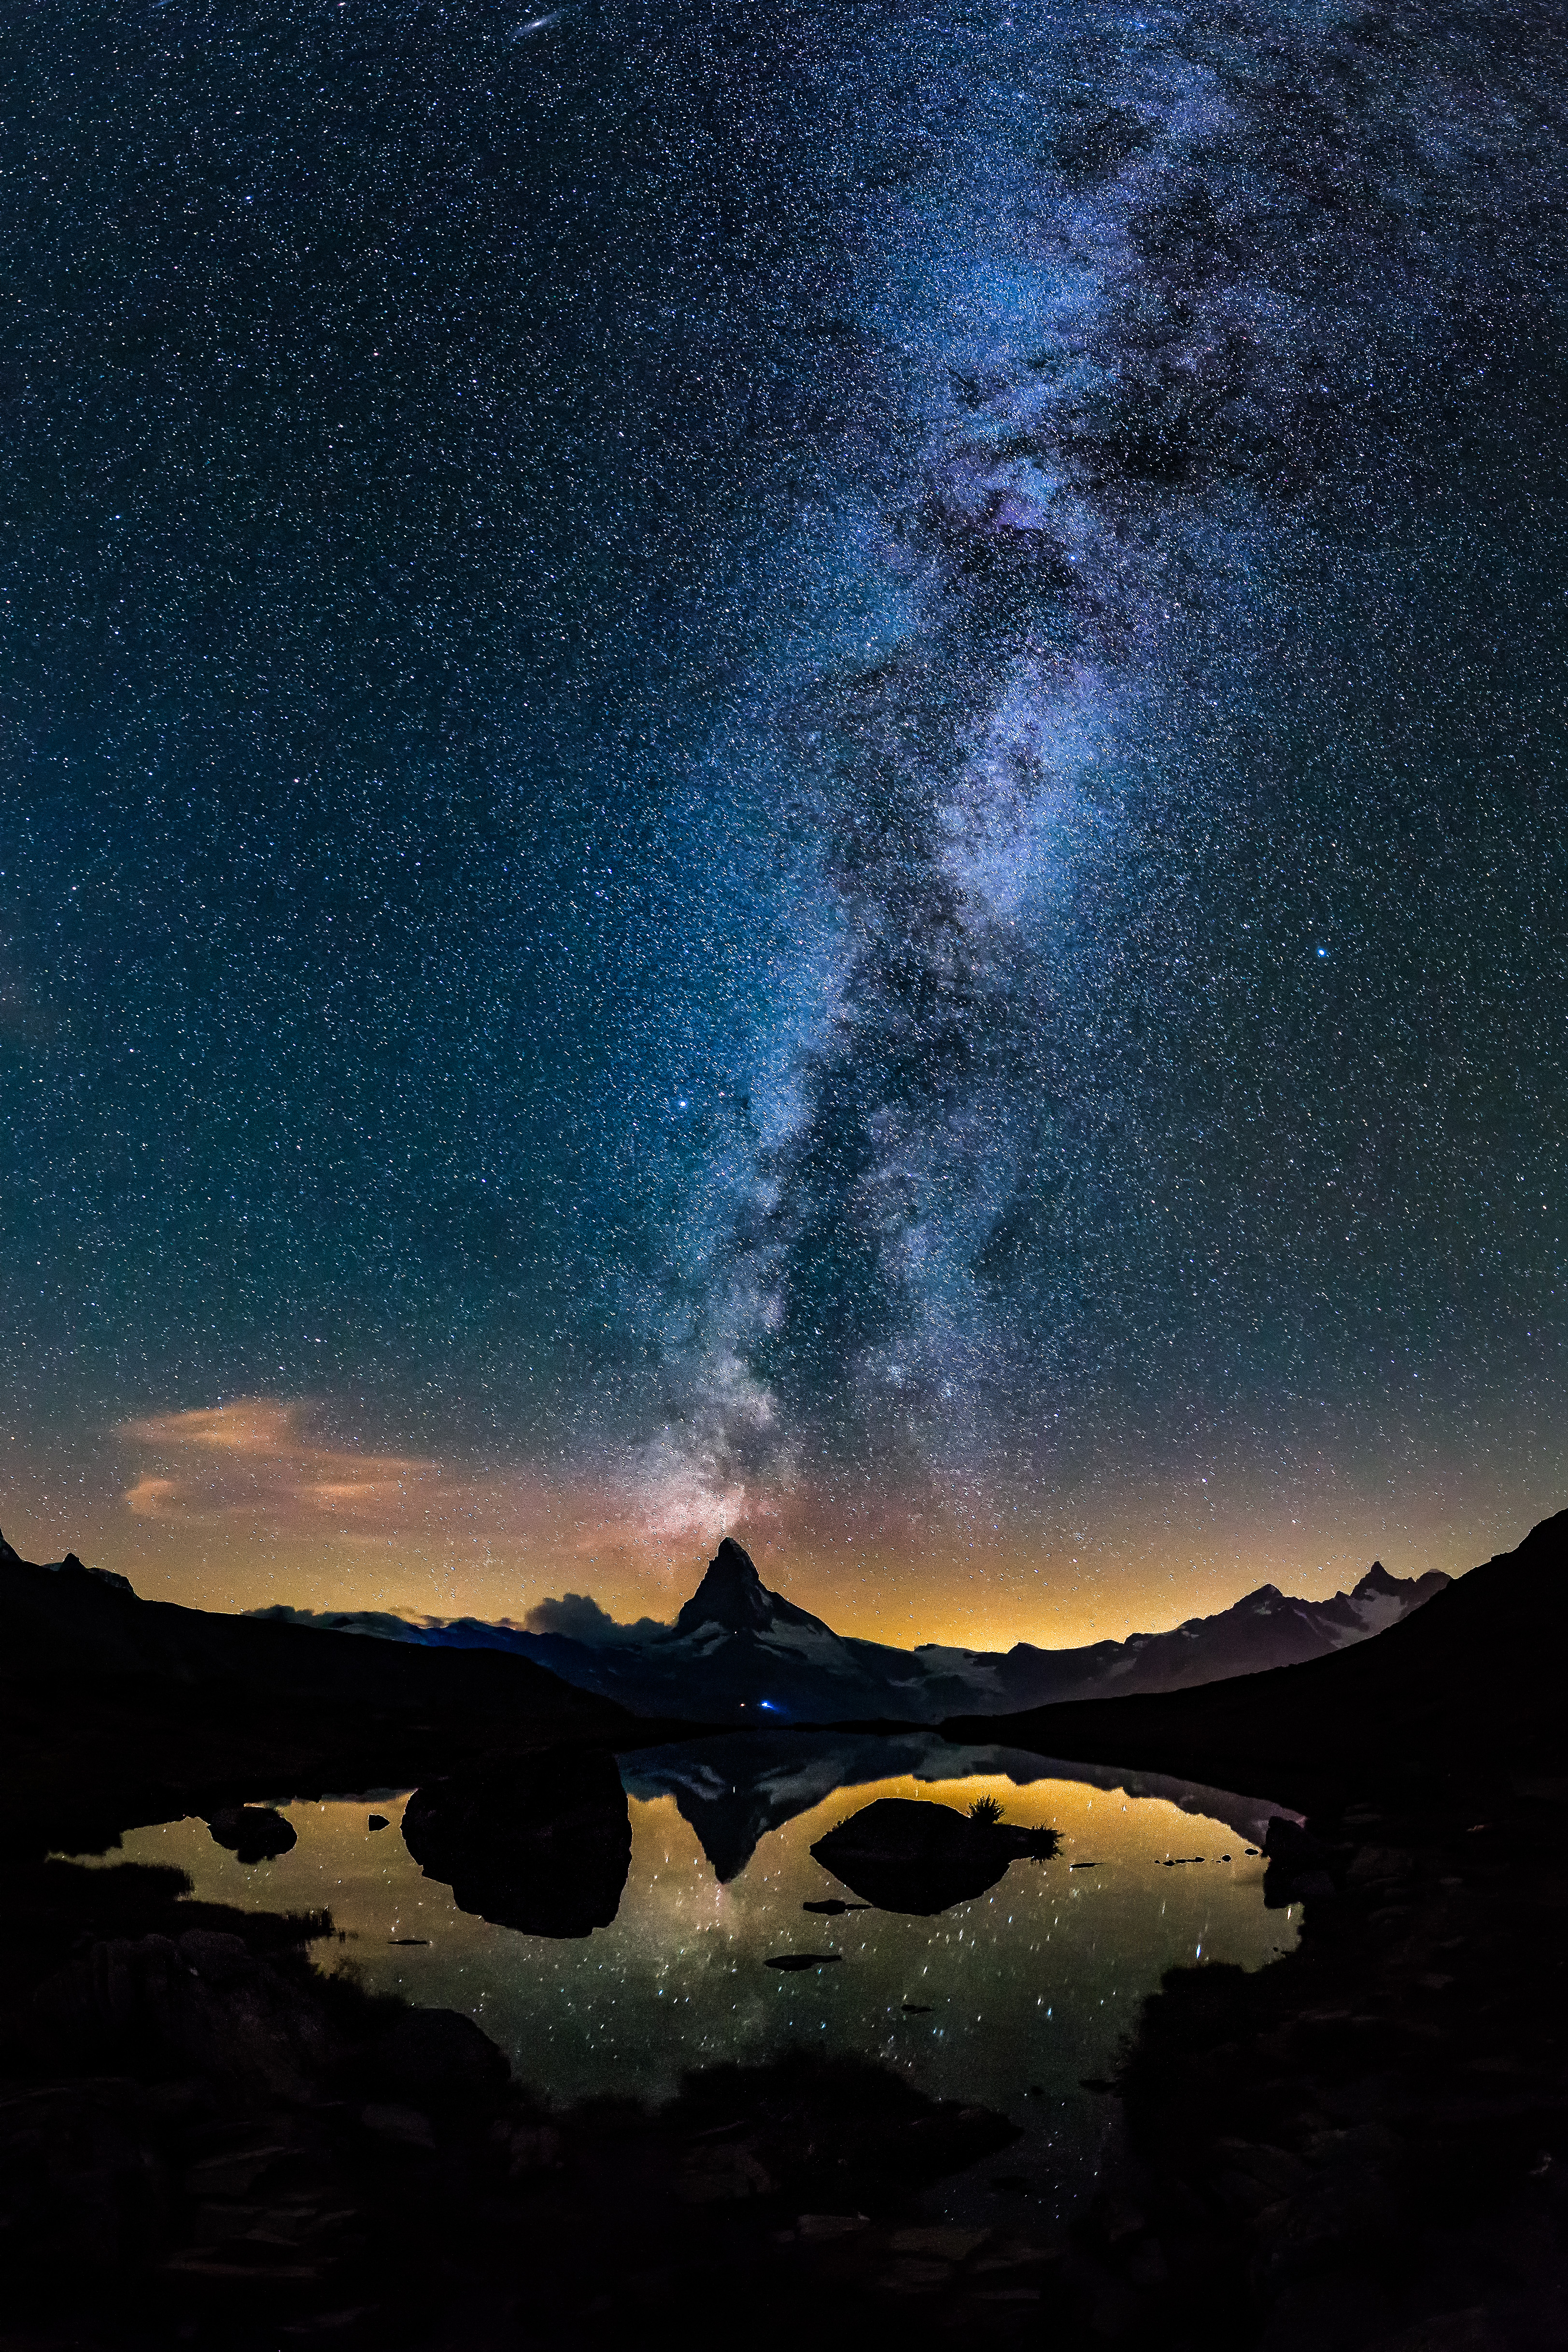 universe, nature, mountains, lake, starry sky images